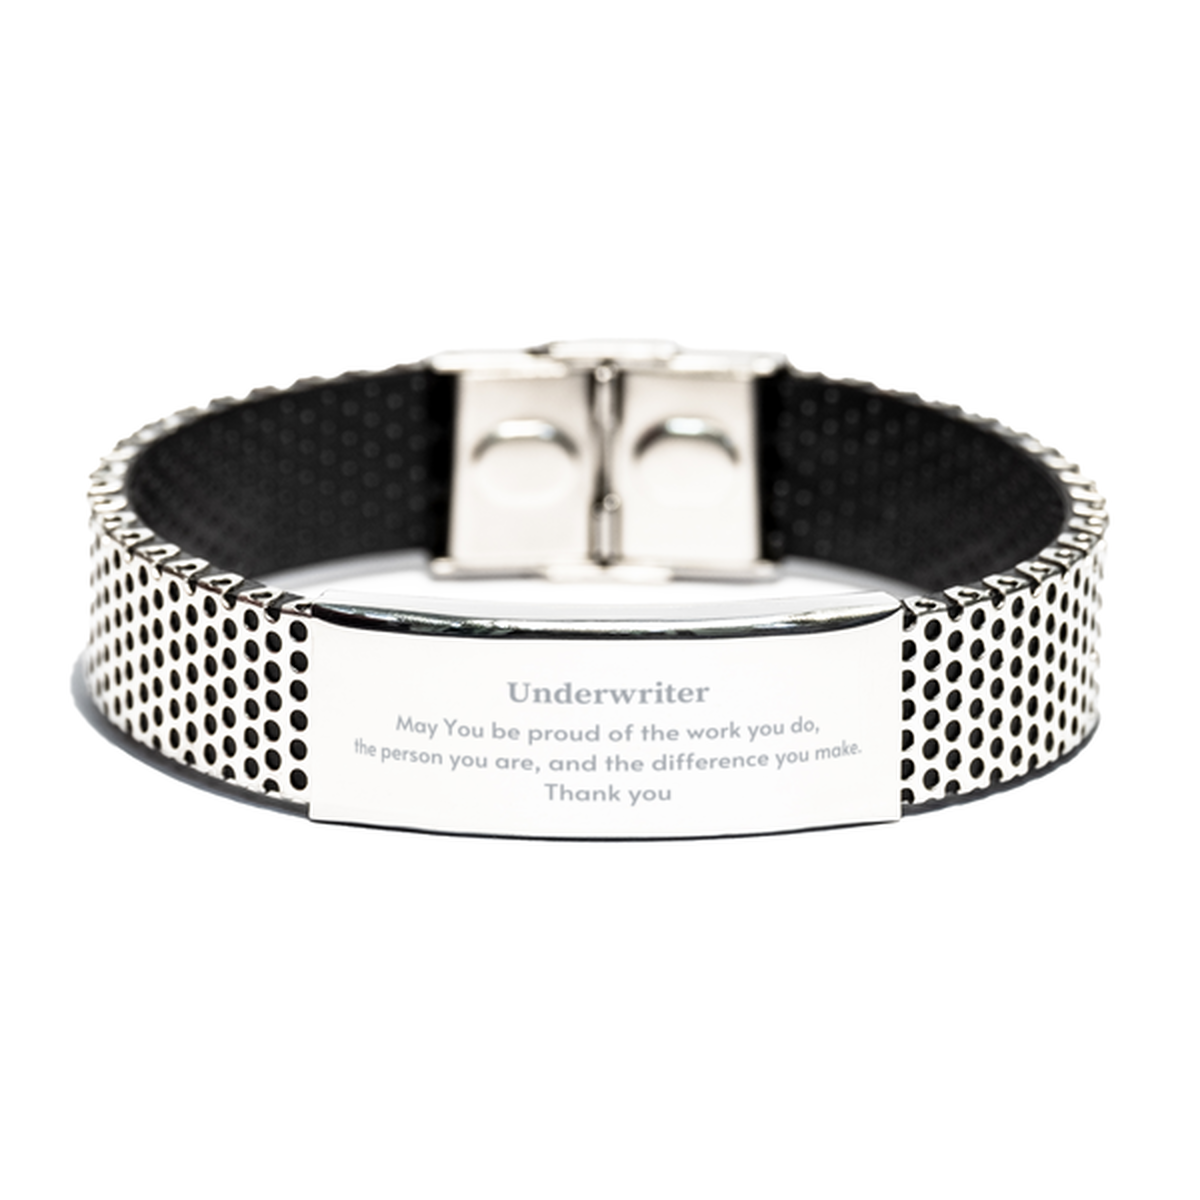 Heartwarming Stainless Steel Bracelet Retirement Coworkers Gifts for Underwriter, Underwriter May You be proud of the work you do, the person you are Gifts for Boss Men Women Friends